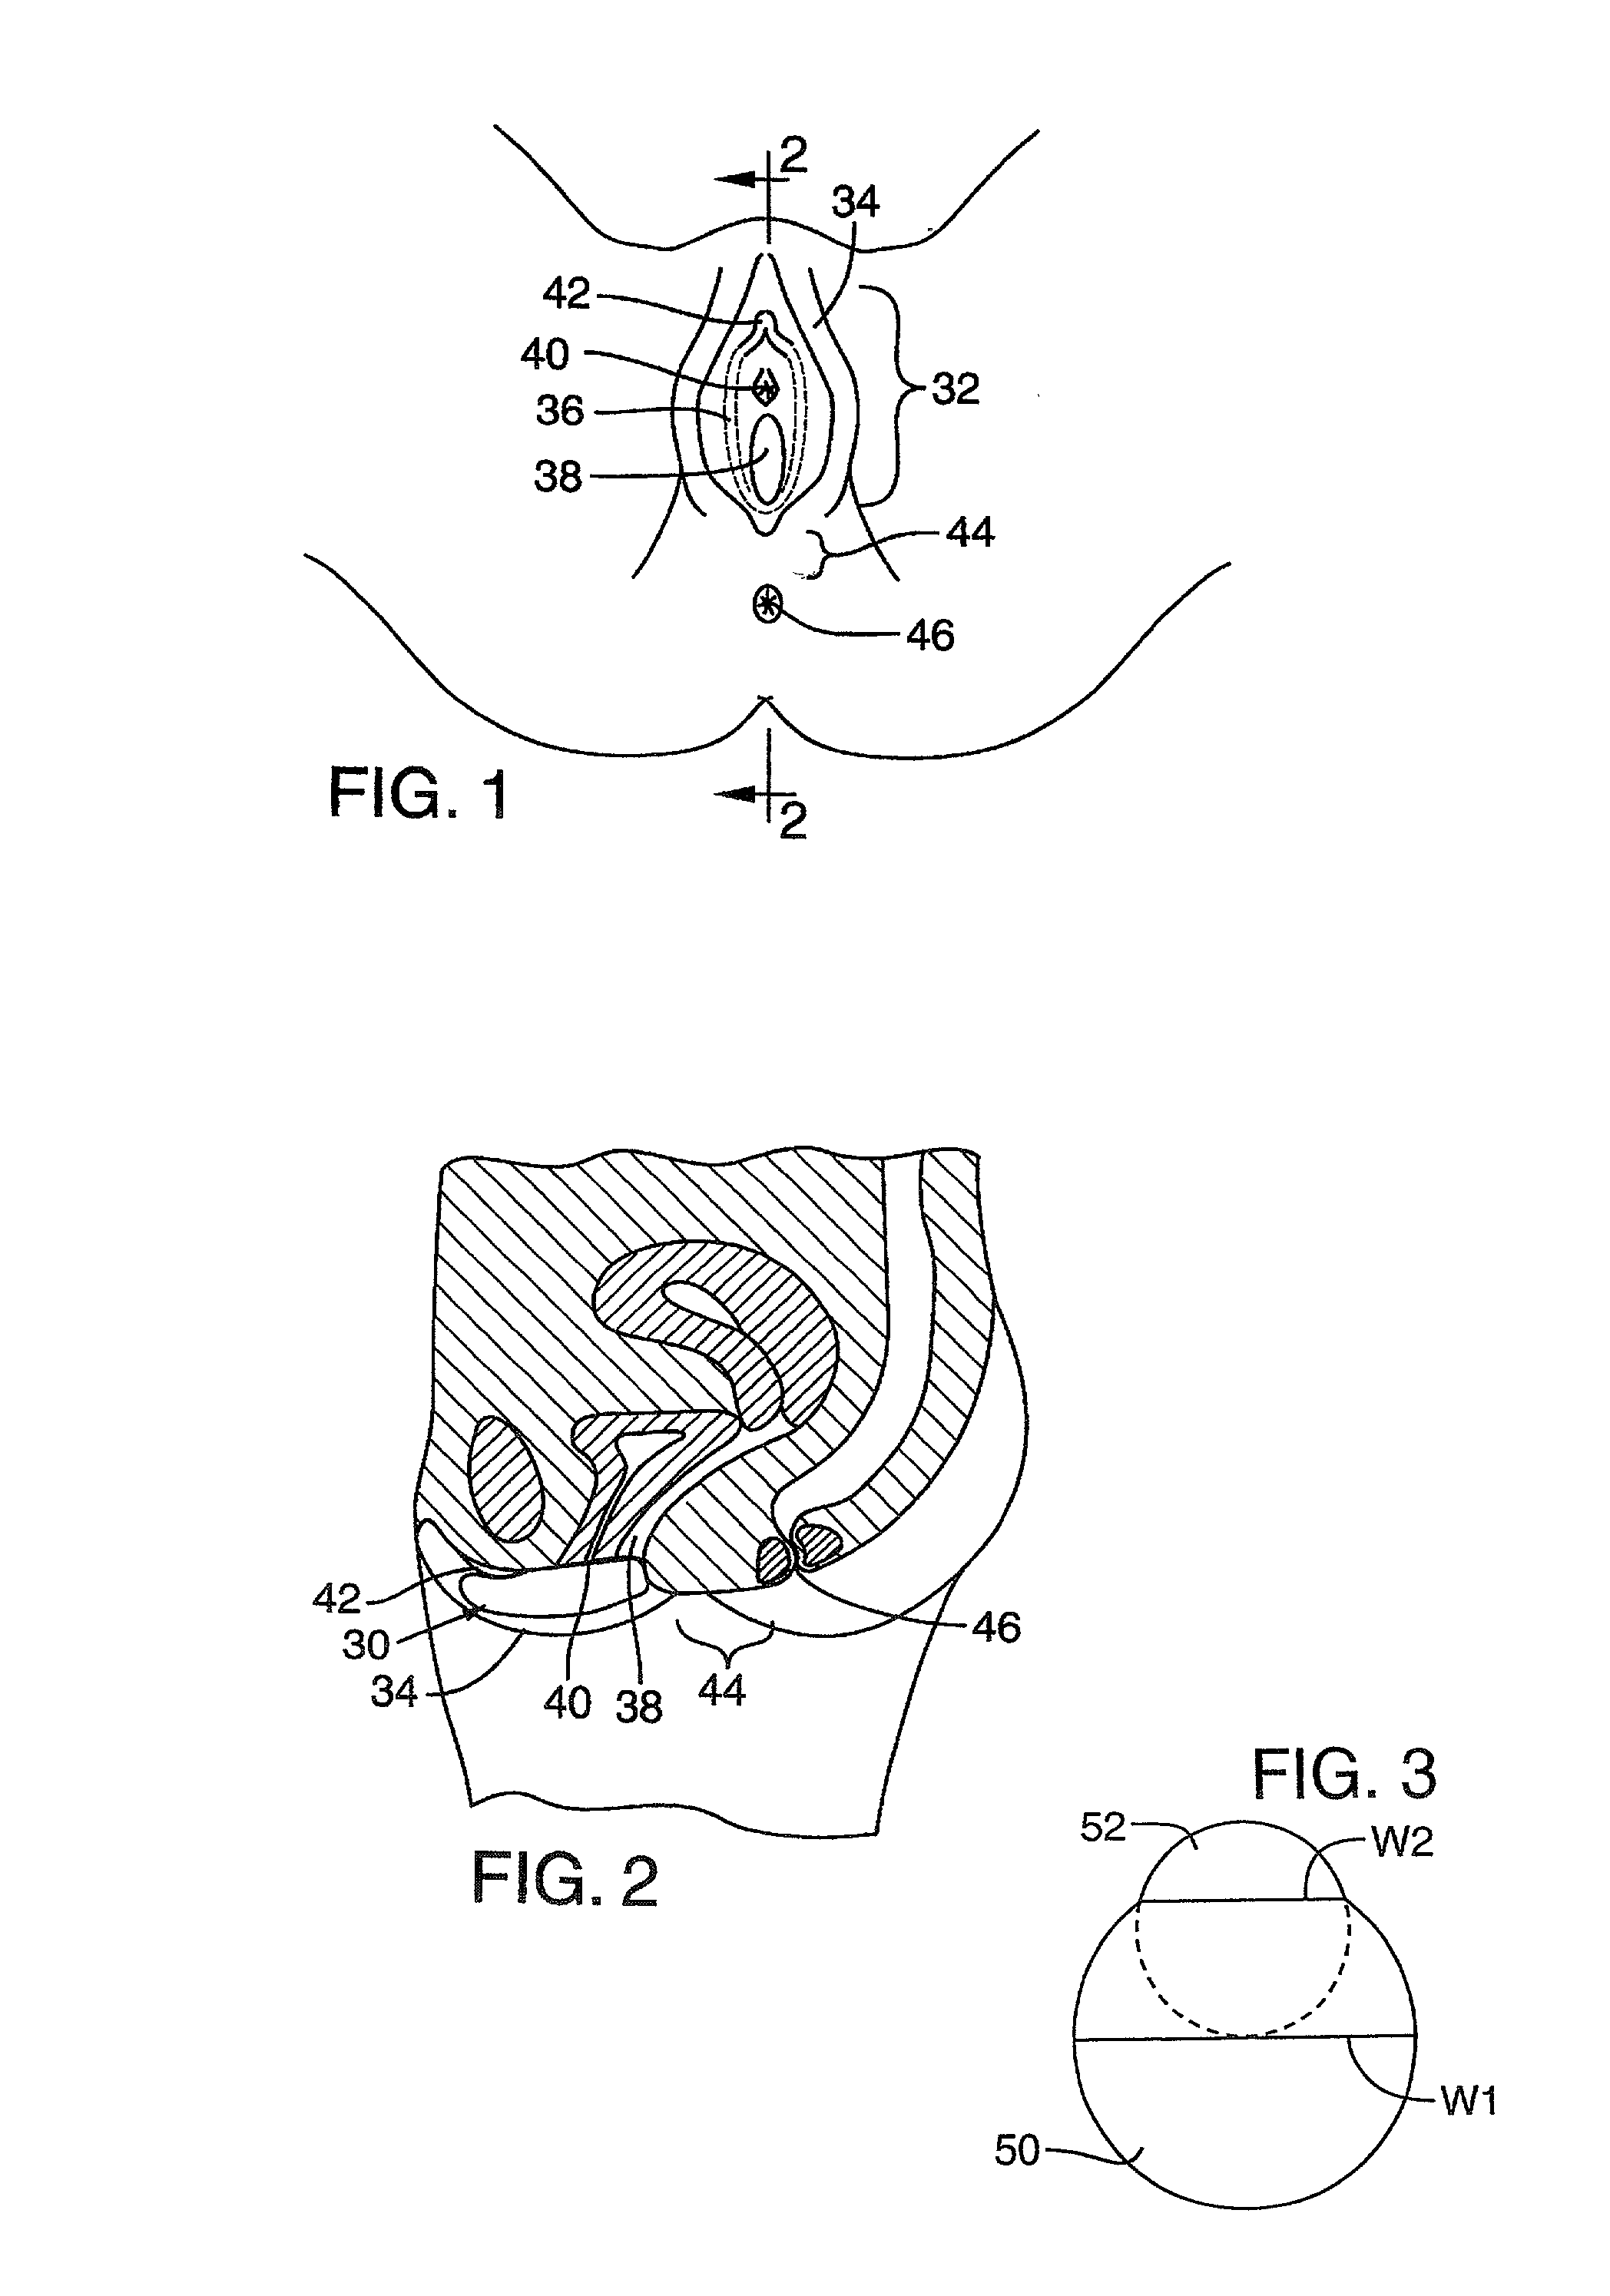 Administration of therapeutic or diagnostic agents using interlabial pad